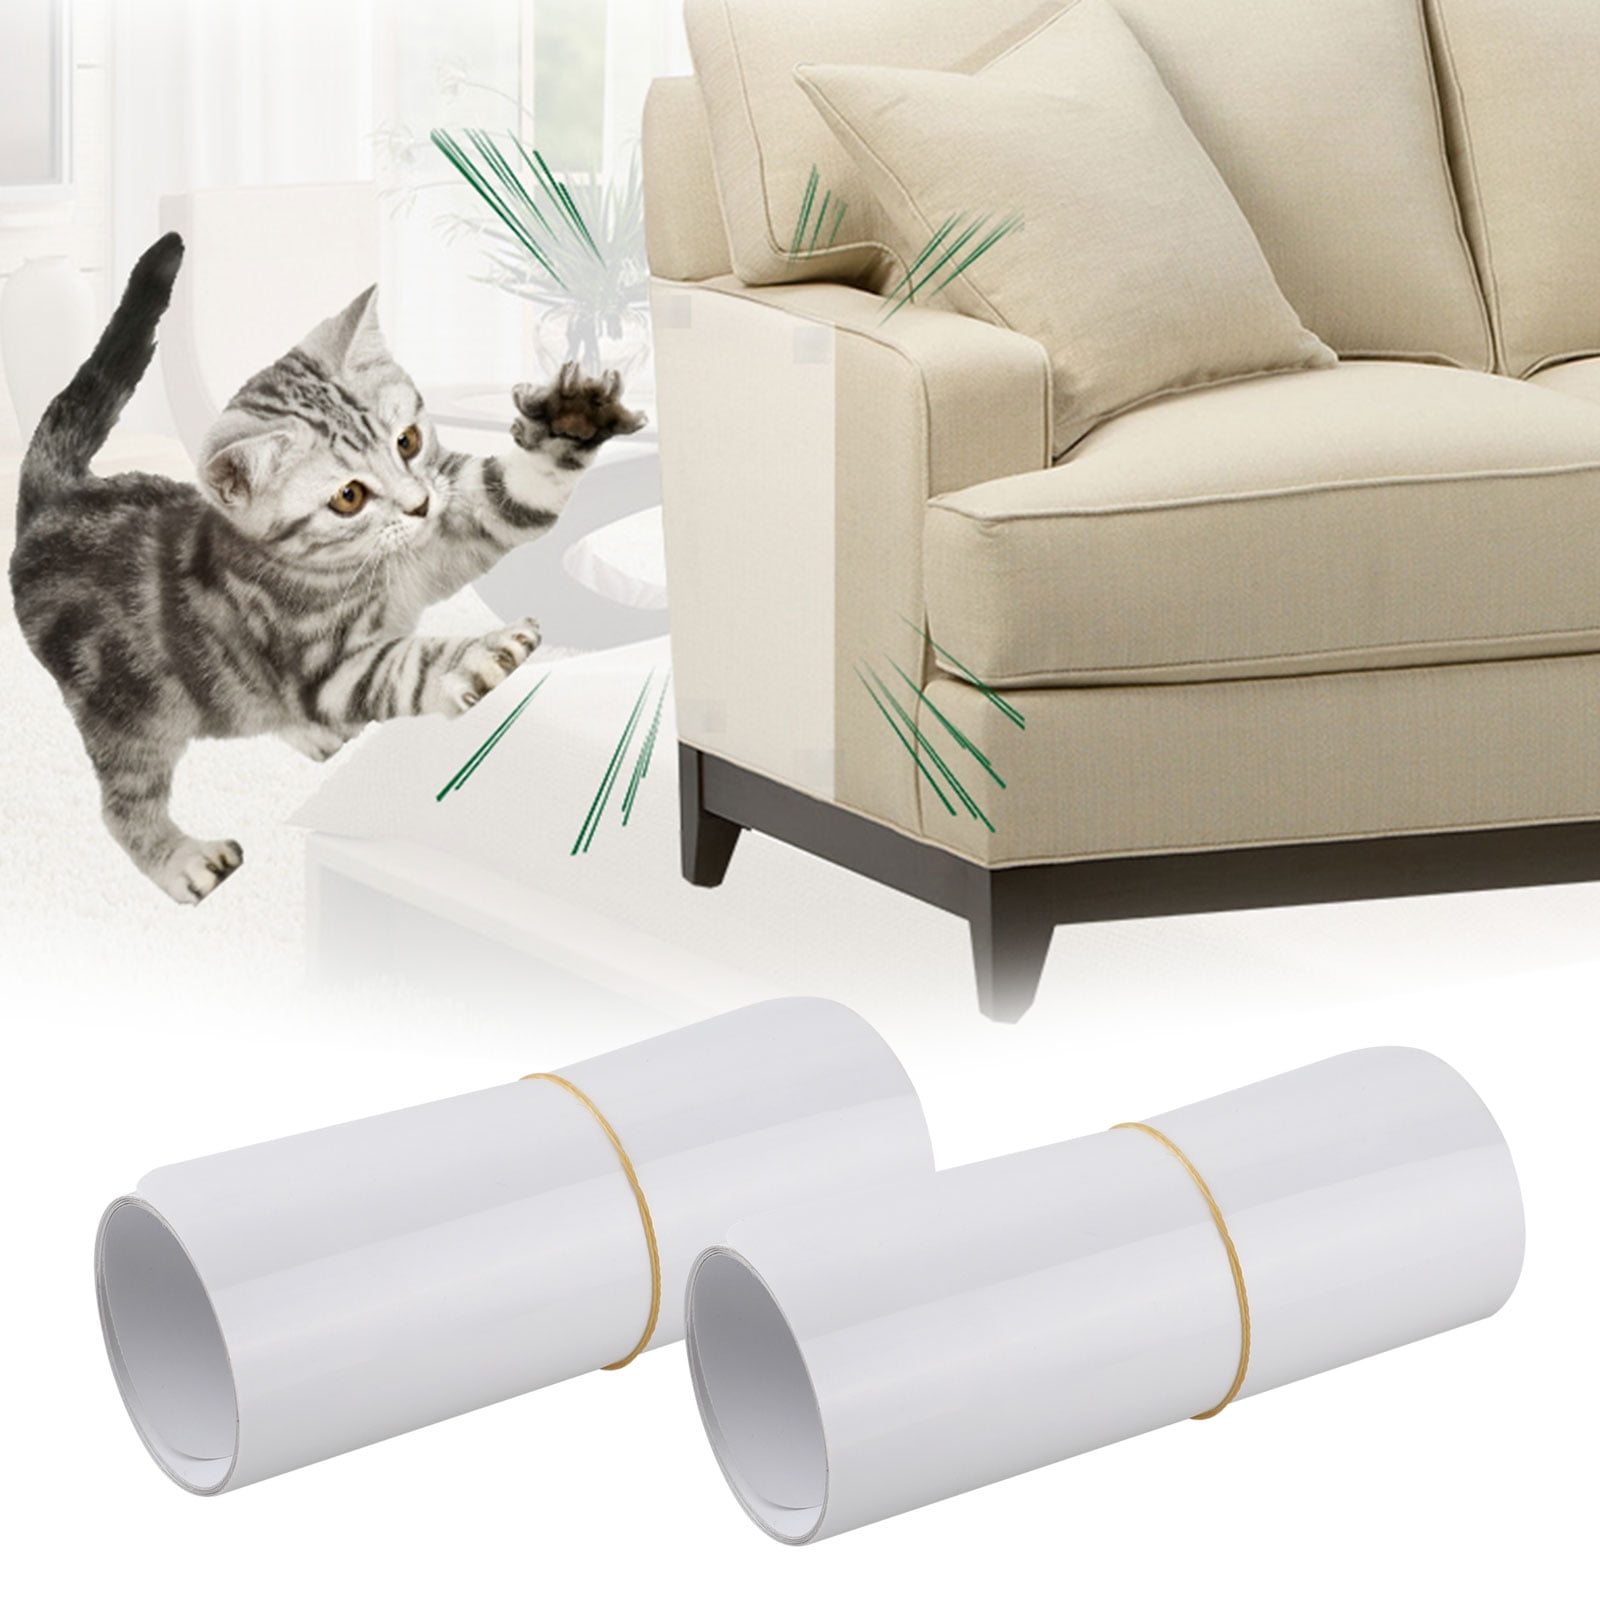 2 Pcs Furniture Protectors From Cats Stop Cat Scratching Couch